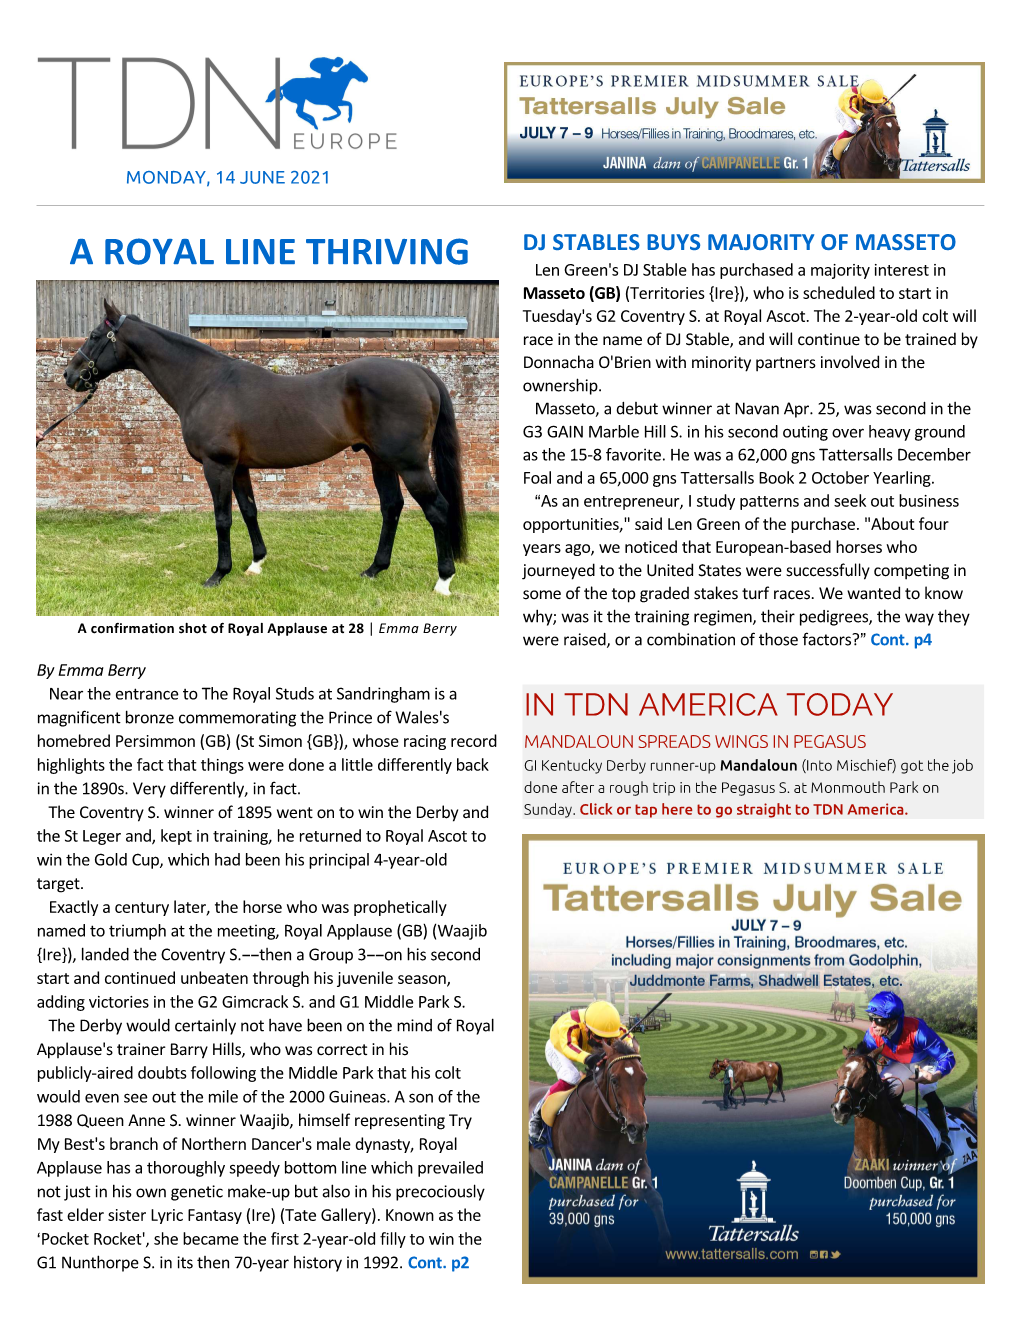 Tdn Europe • Page 2 of 18 • Thetdn.Com Monday • 14 June 2021